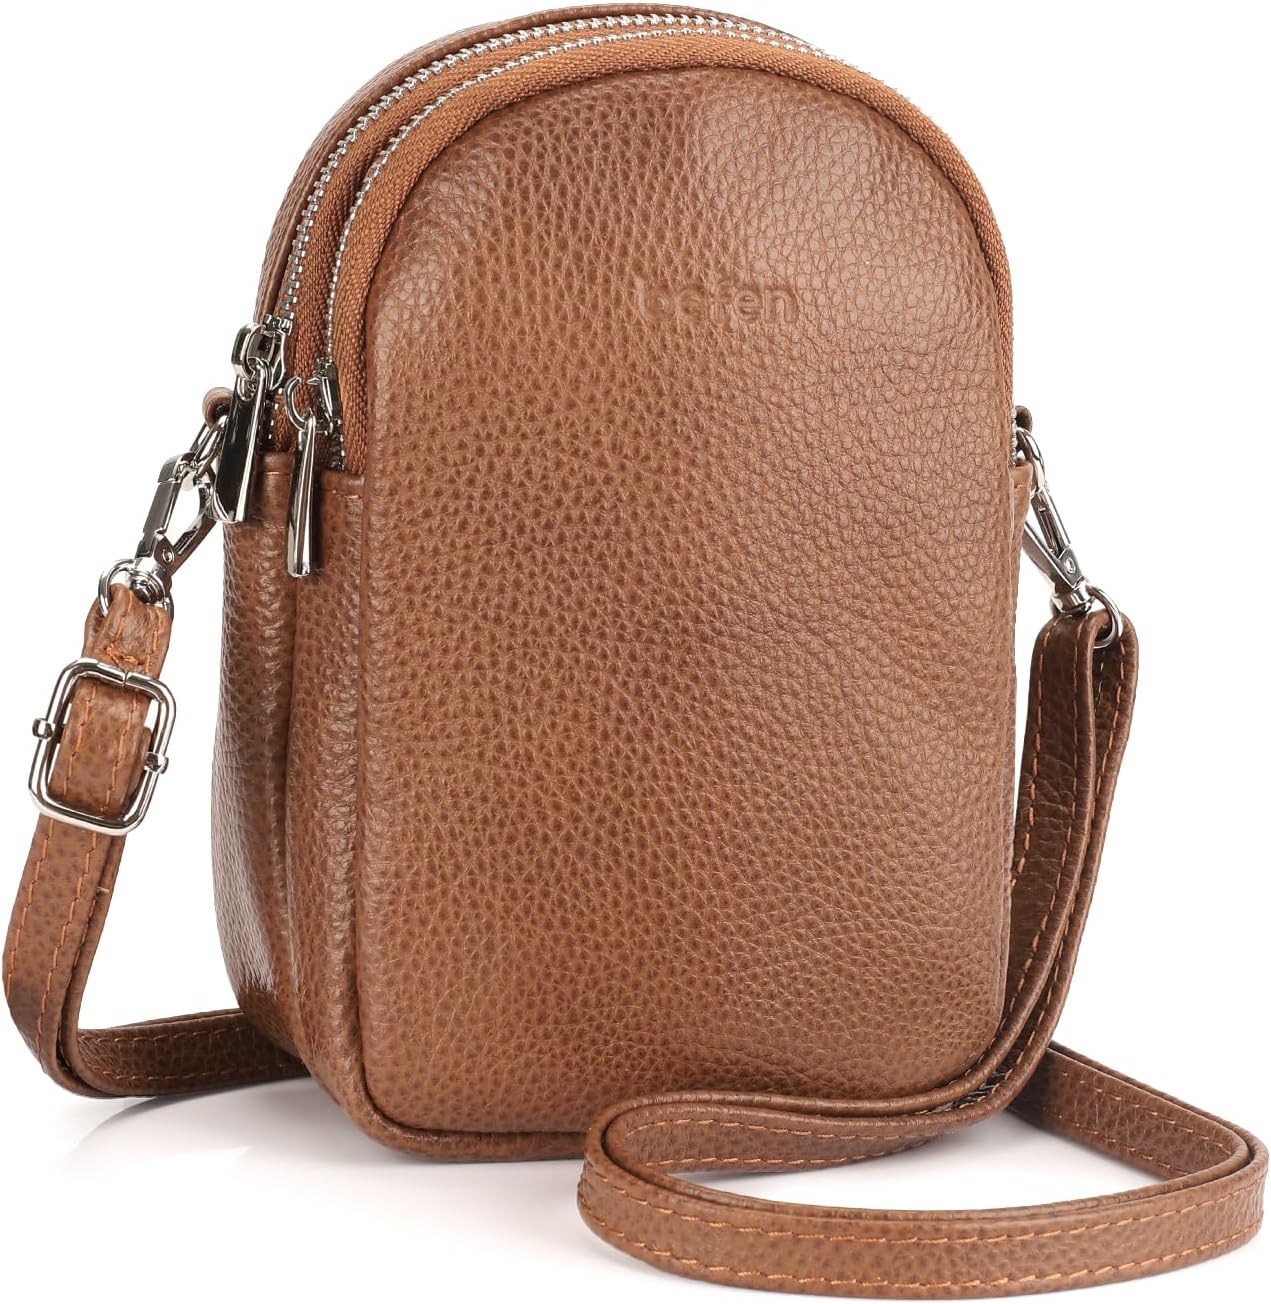 Nice hand on the leather with even color and grain. Clean stitching. Smooth zipper. Compact and well-organized.